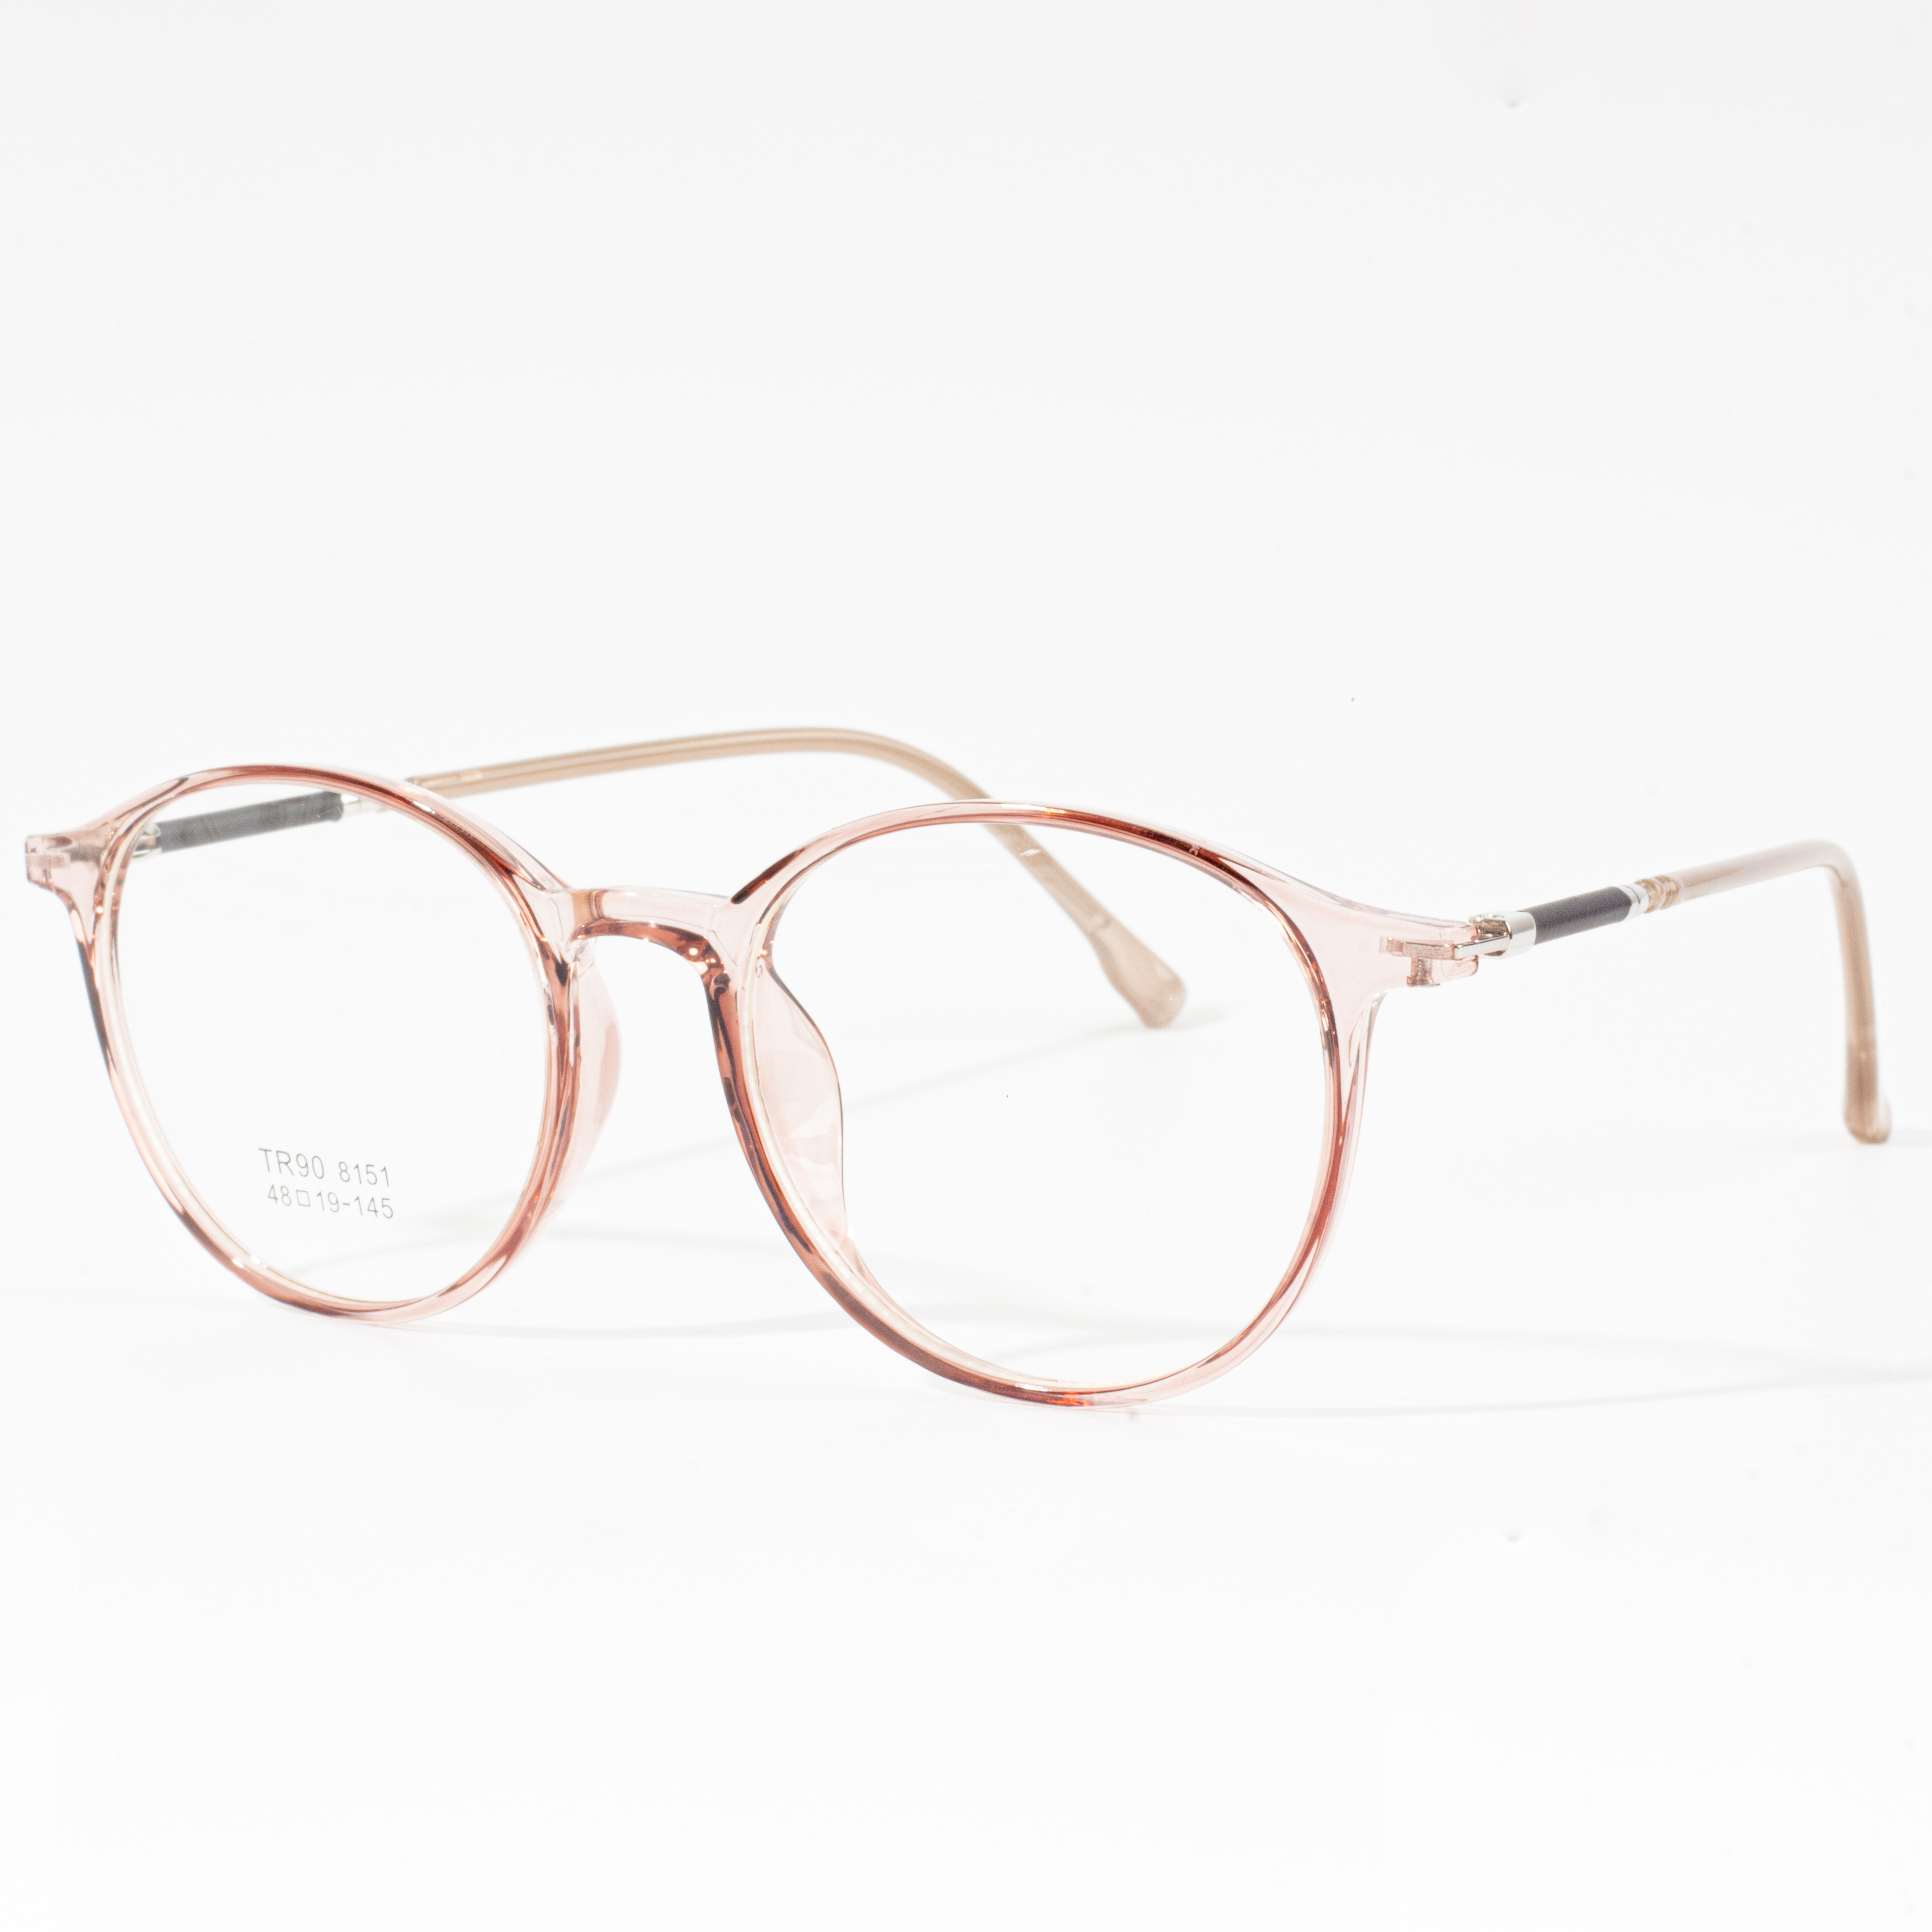 Mens & Womens Designer Frames - Eyeglasses.com 广告· https://www.eyeglasses.com/ (888) 896-3885 Shop Designer Frames From Top Global Eyeglass Brands For the Half Off Retail Prices Today.